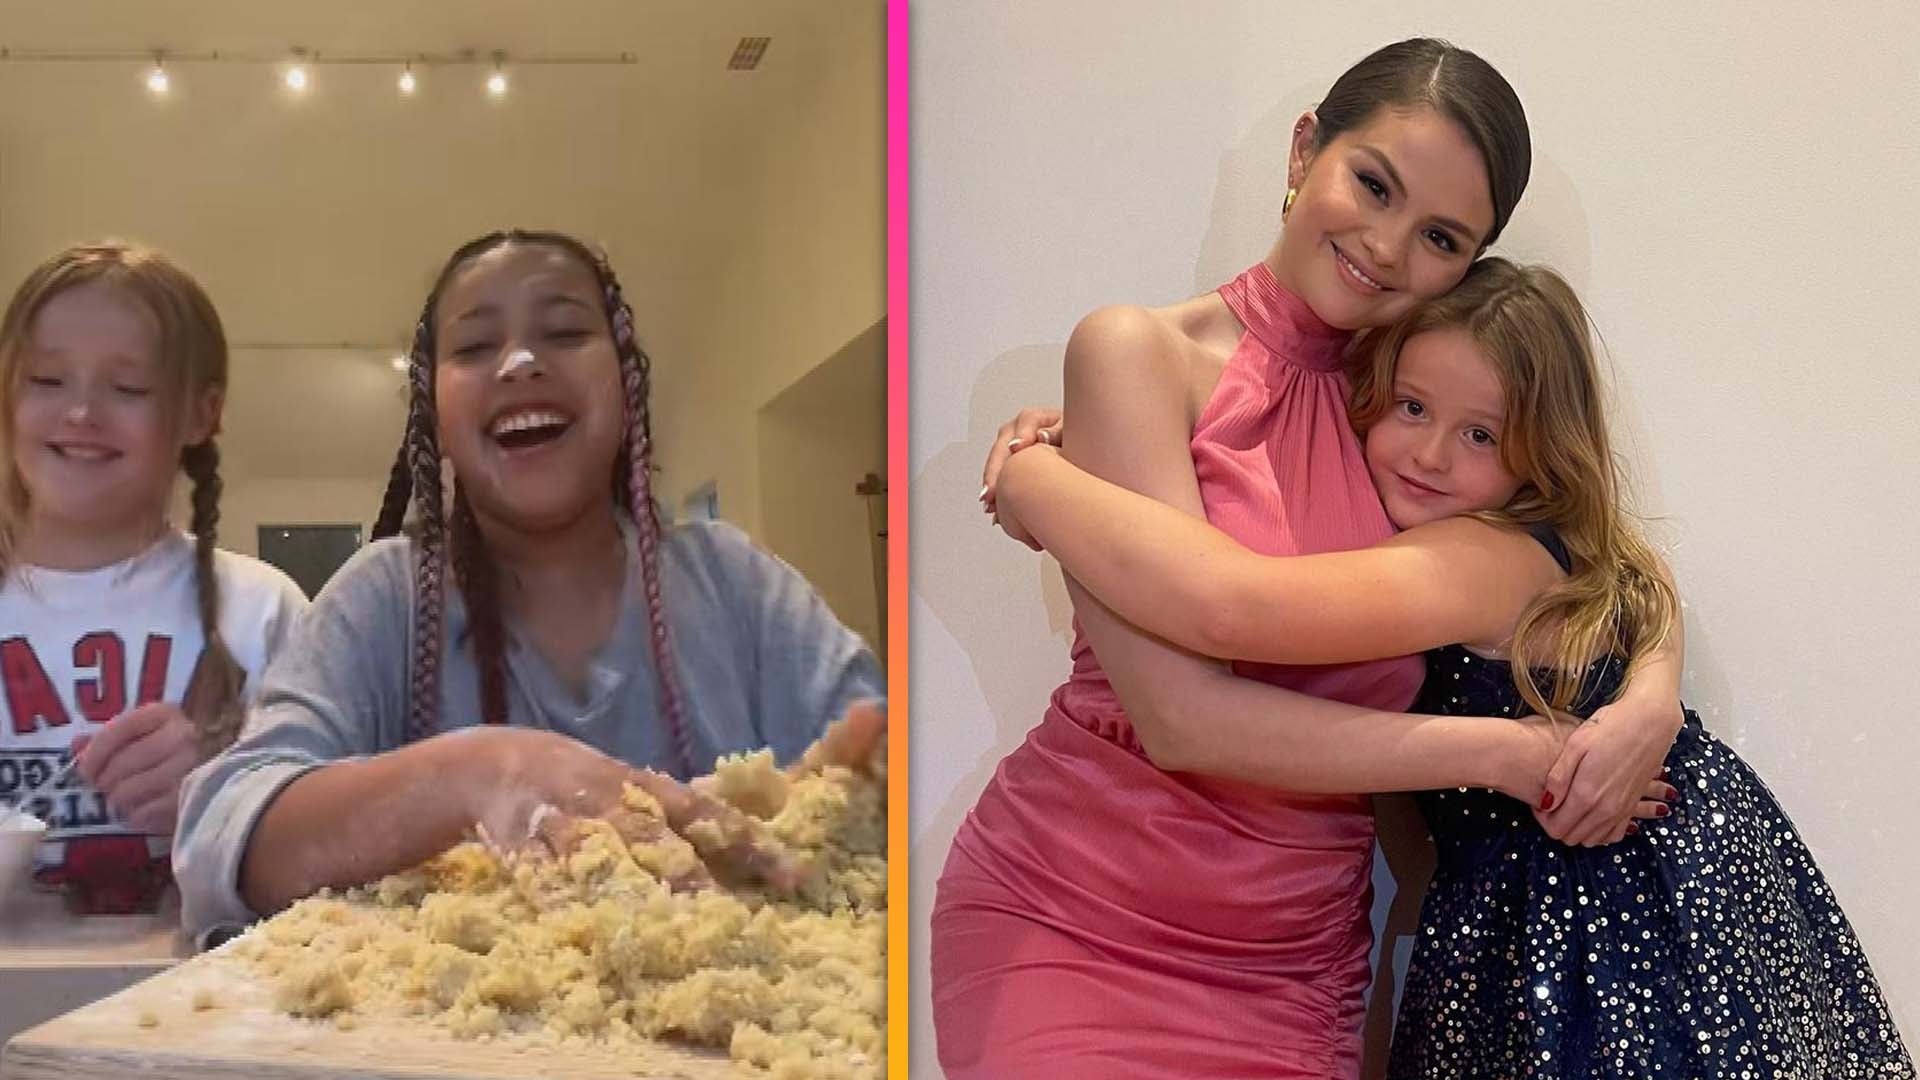 Inside North West and Selena Gomez’s Sister Gracie Teefey's Sweet Friendship